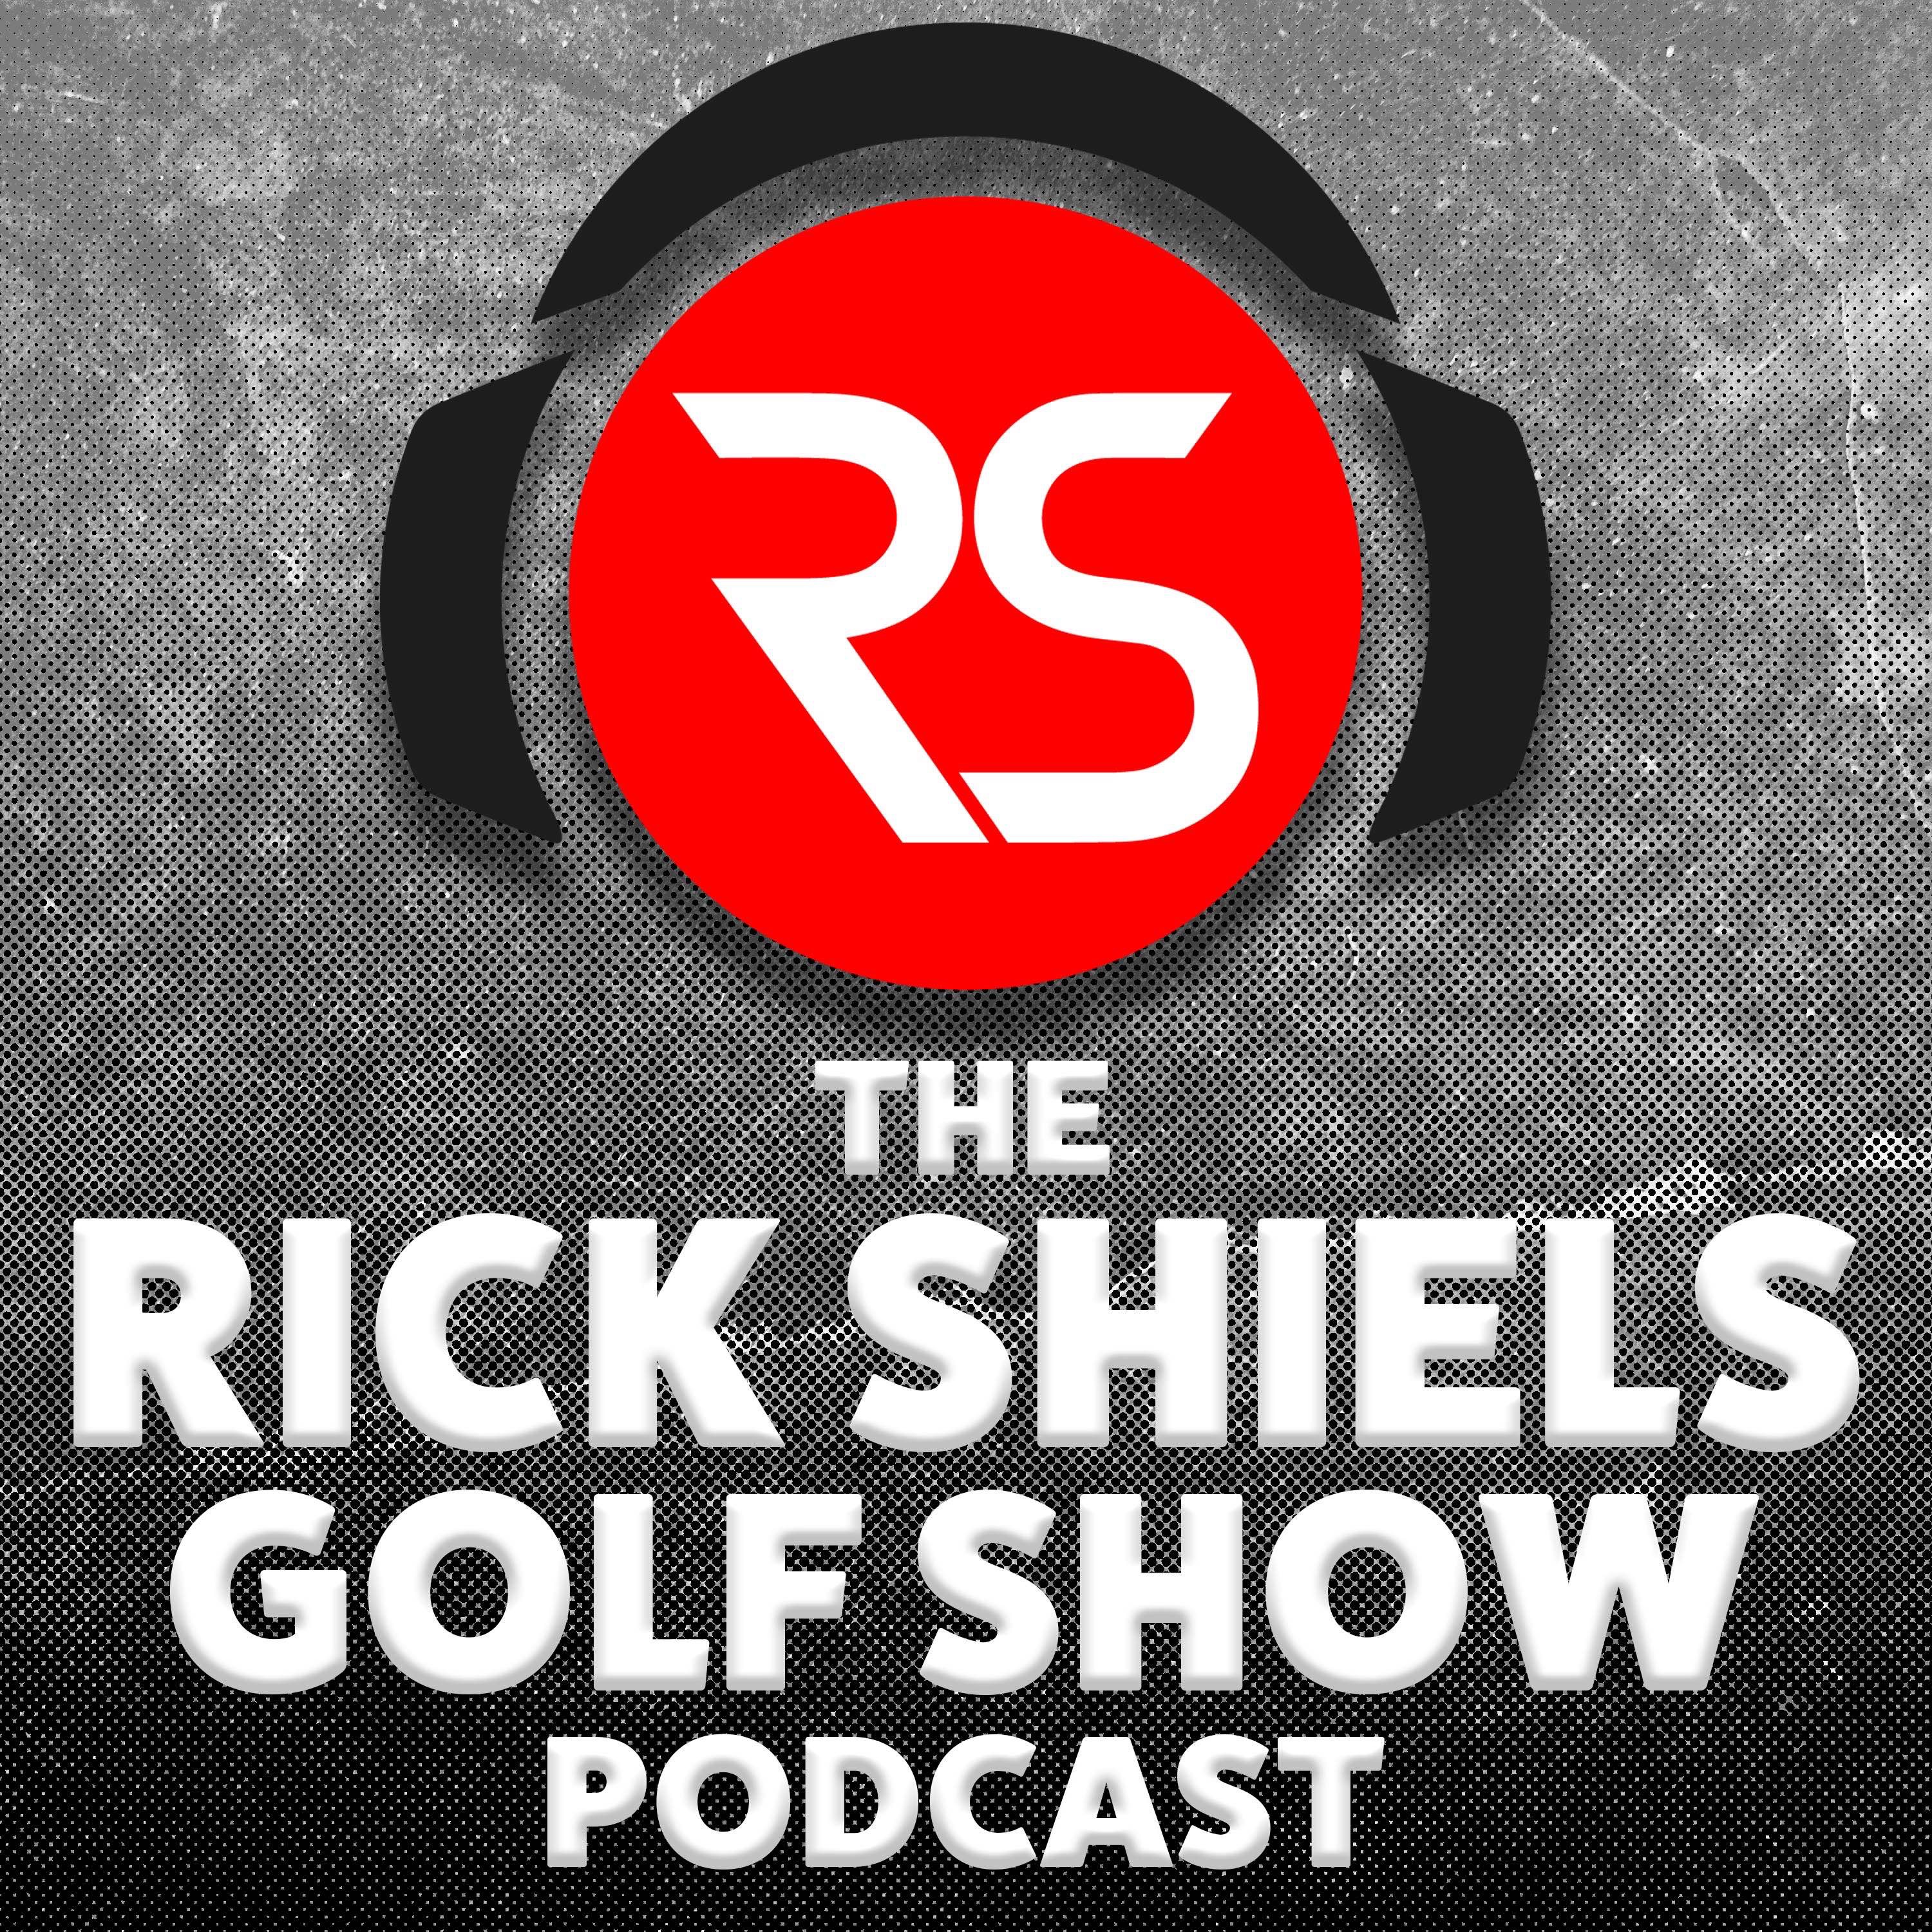 EP239 - Rick Shiels to qualify for The Open!? #TheClubhouse